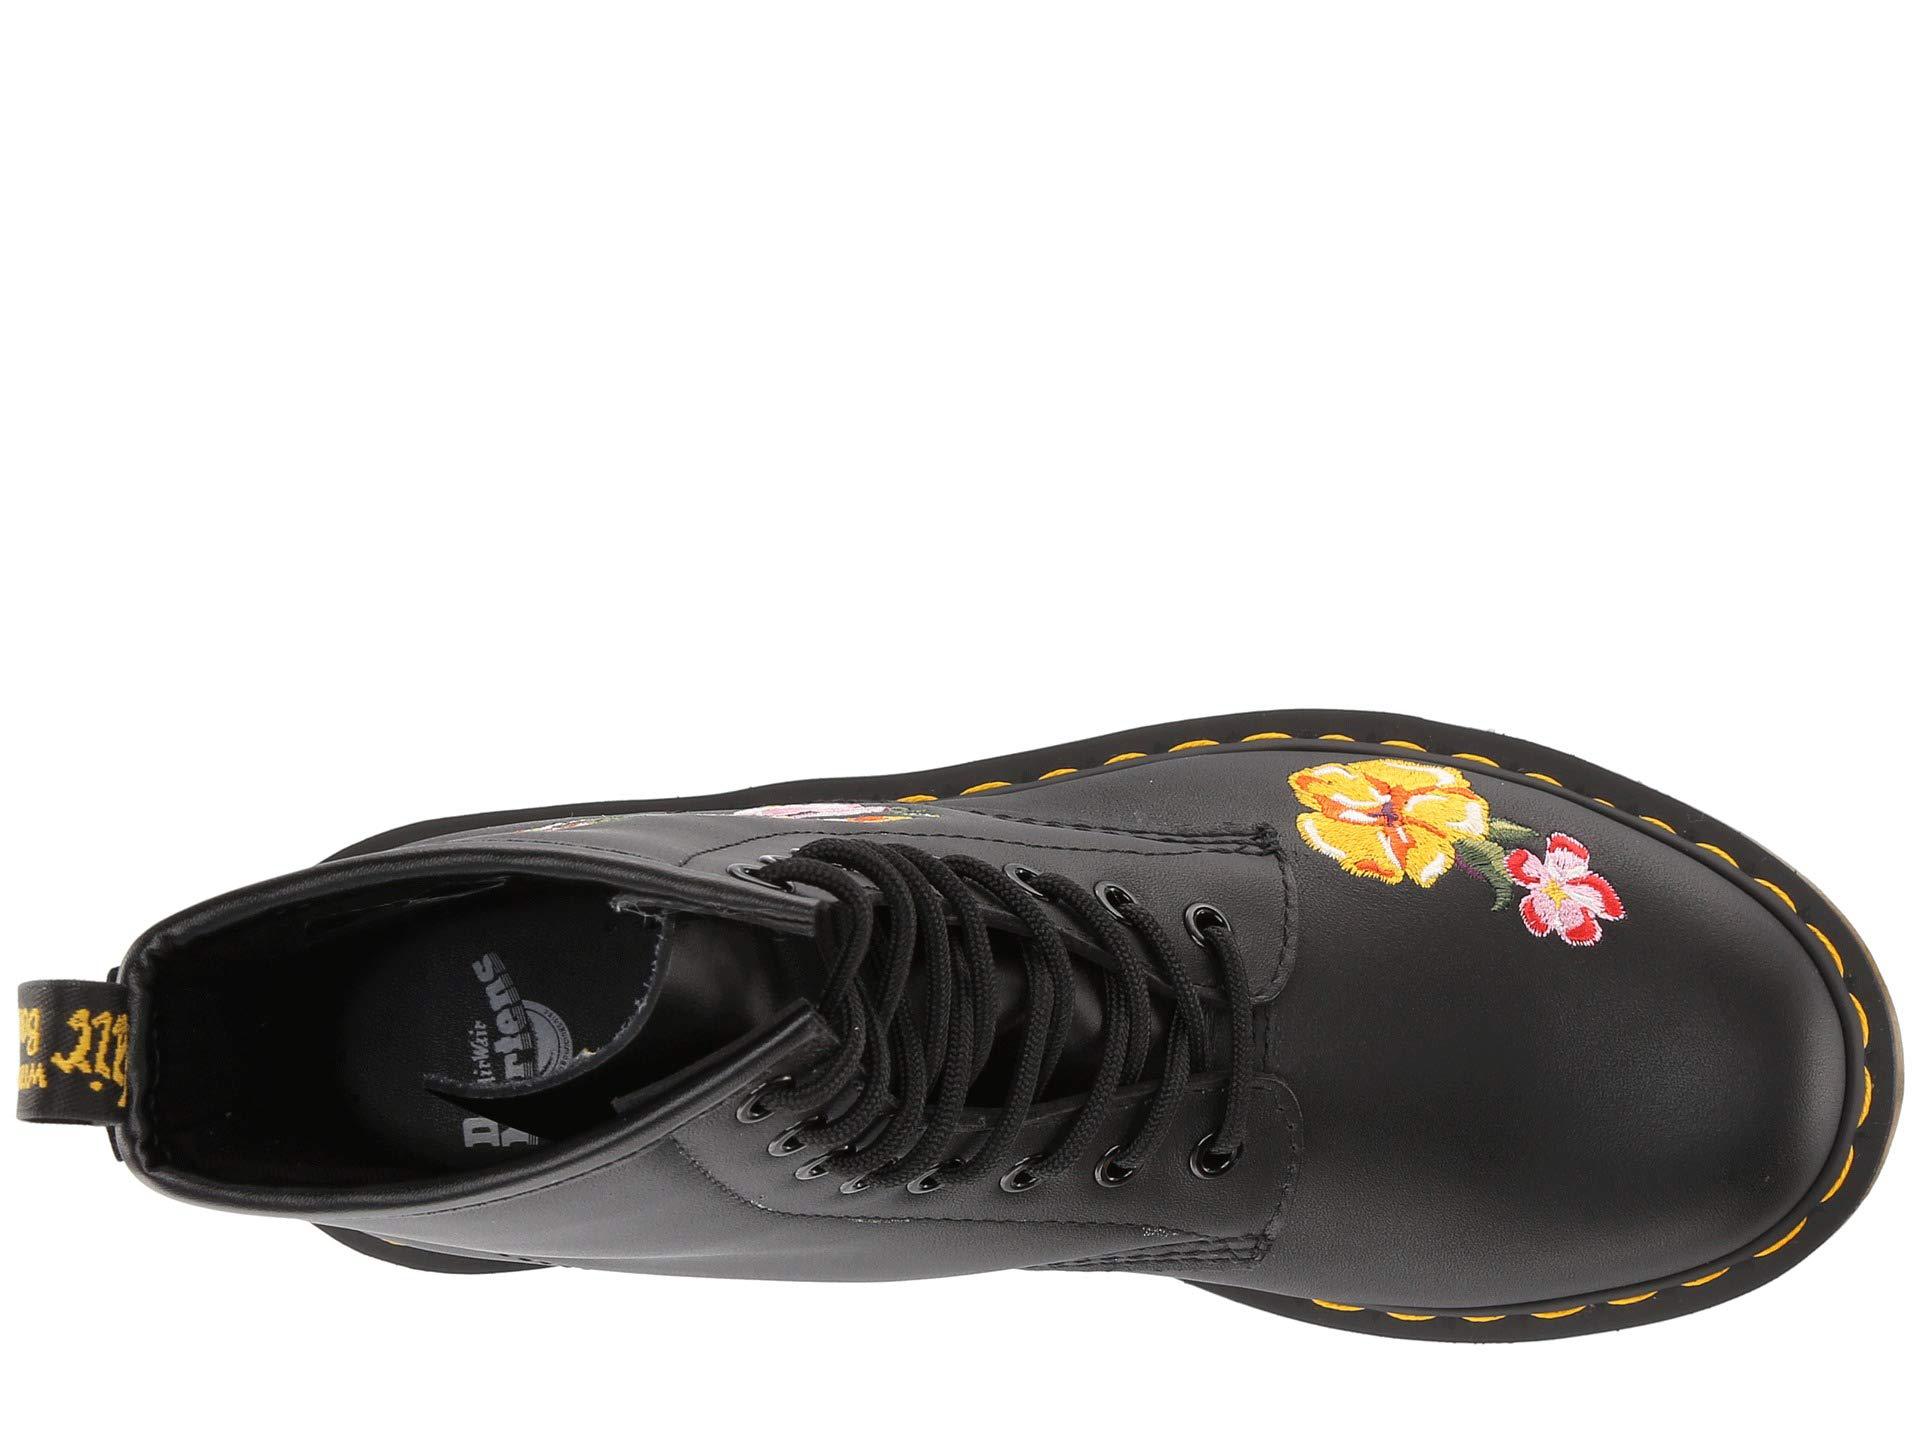 Dr. Martens 1460 Finda Ii Floral Embroidery Combat Boots in Black | Lyst